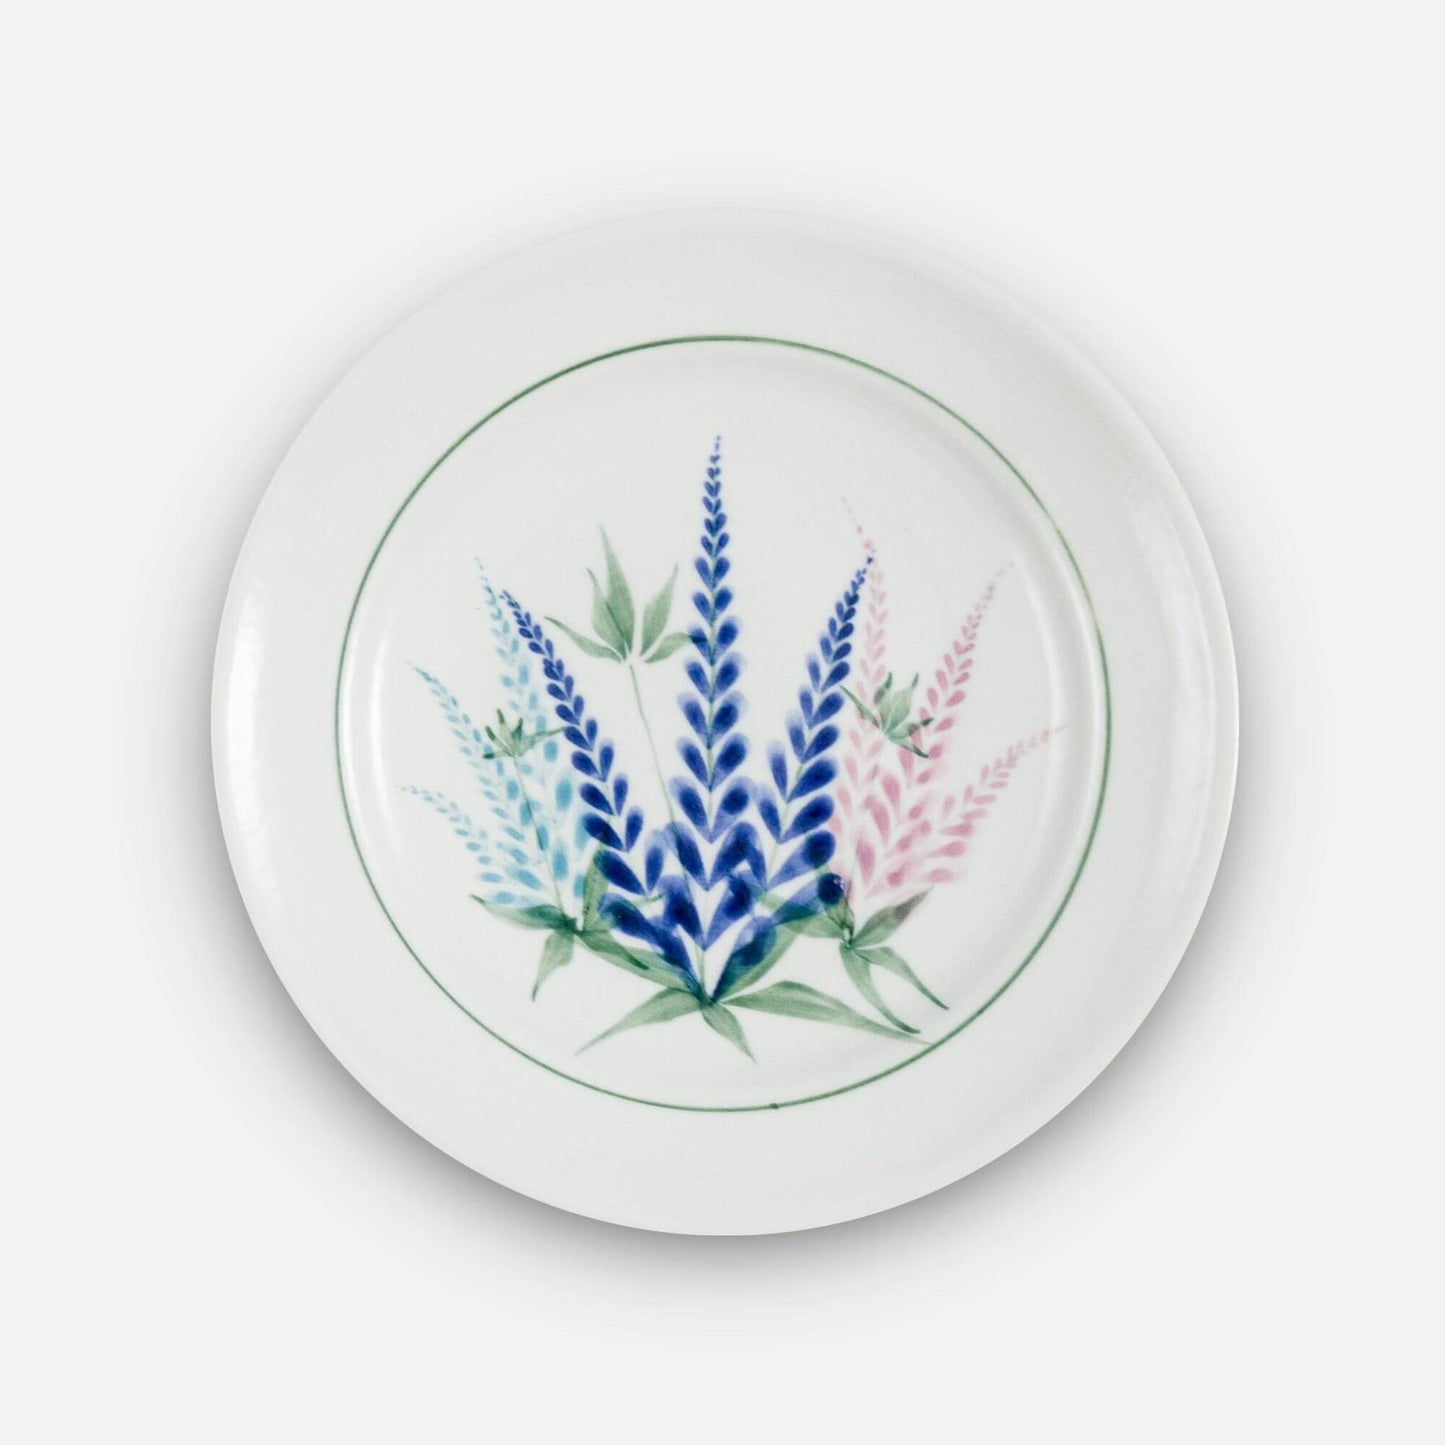 Handmade Pottery Classic Dinner Plate in Lupine pattern made by Georgetown Pottery in Maine